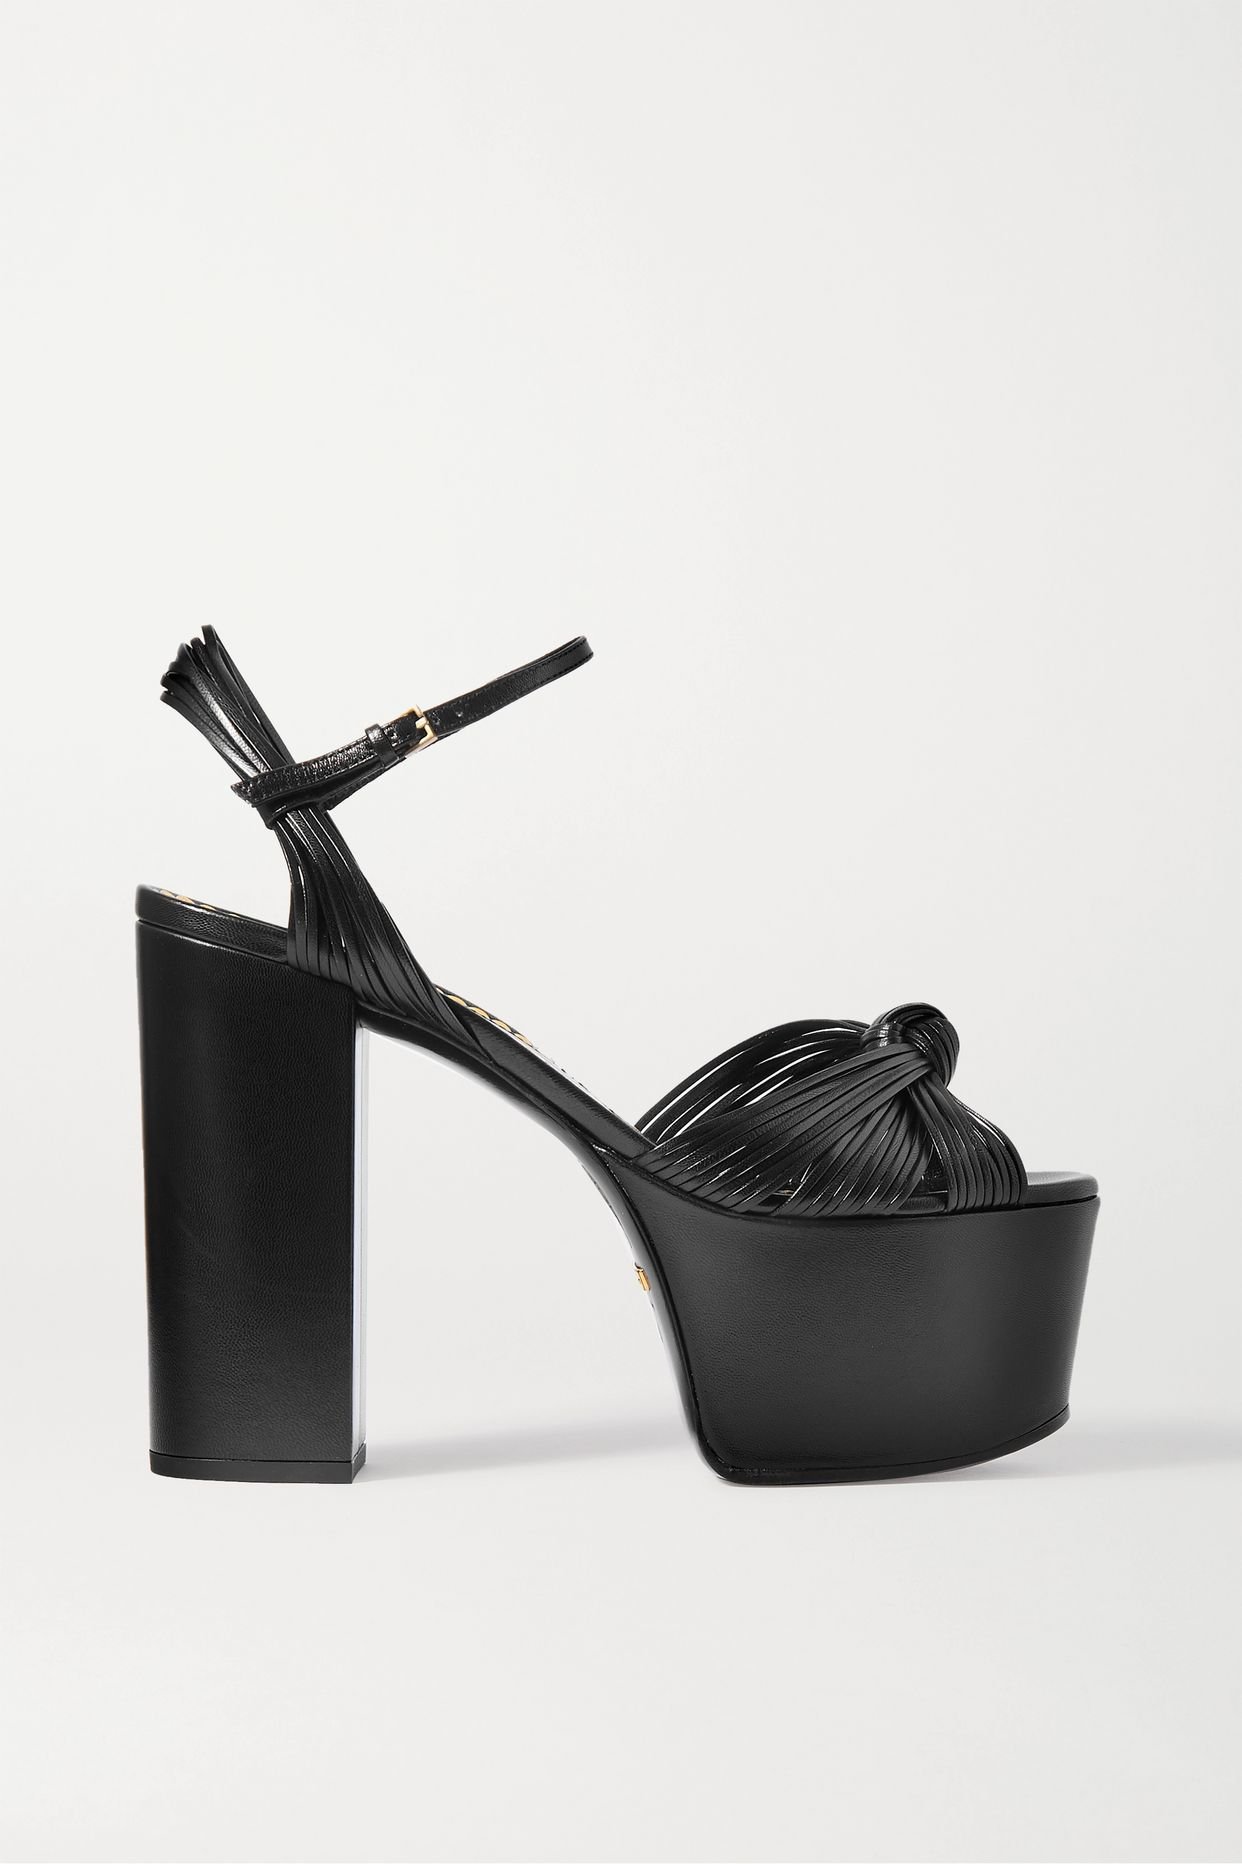 GUCCI - Crawford knotted leather platform sandals